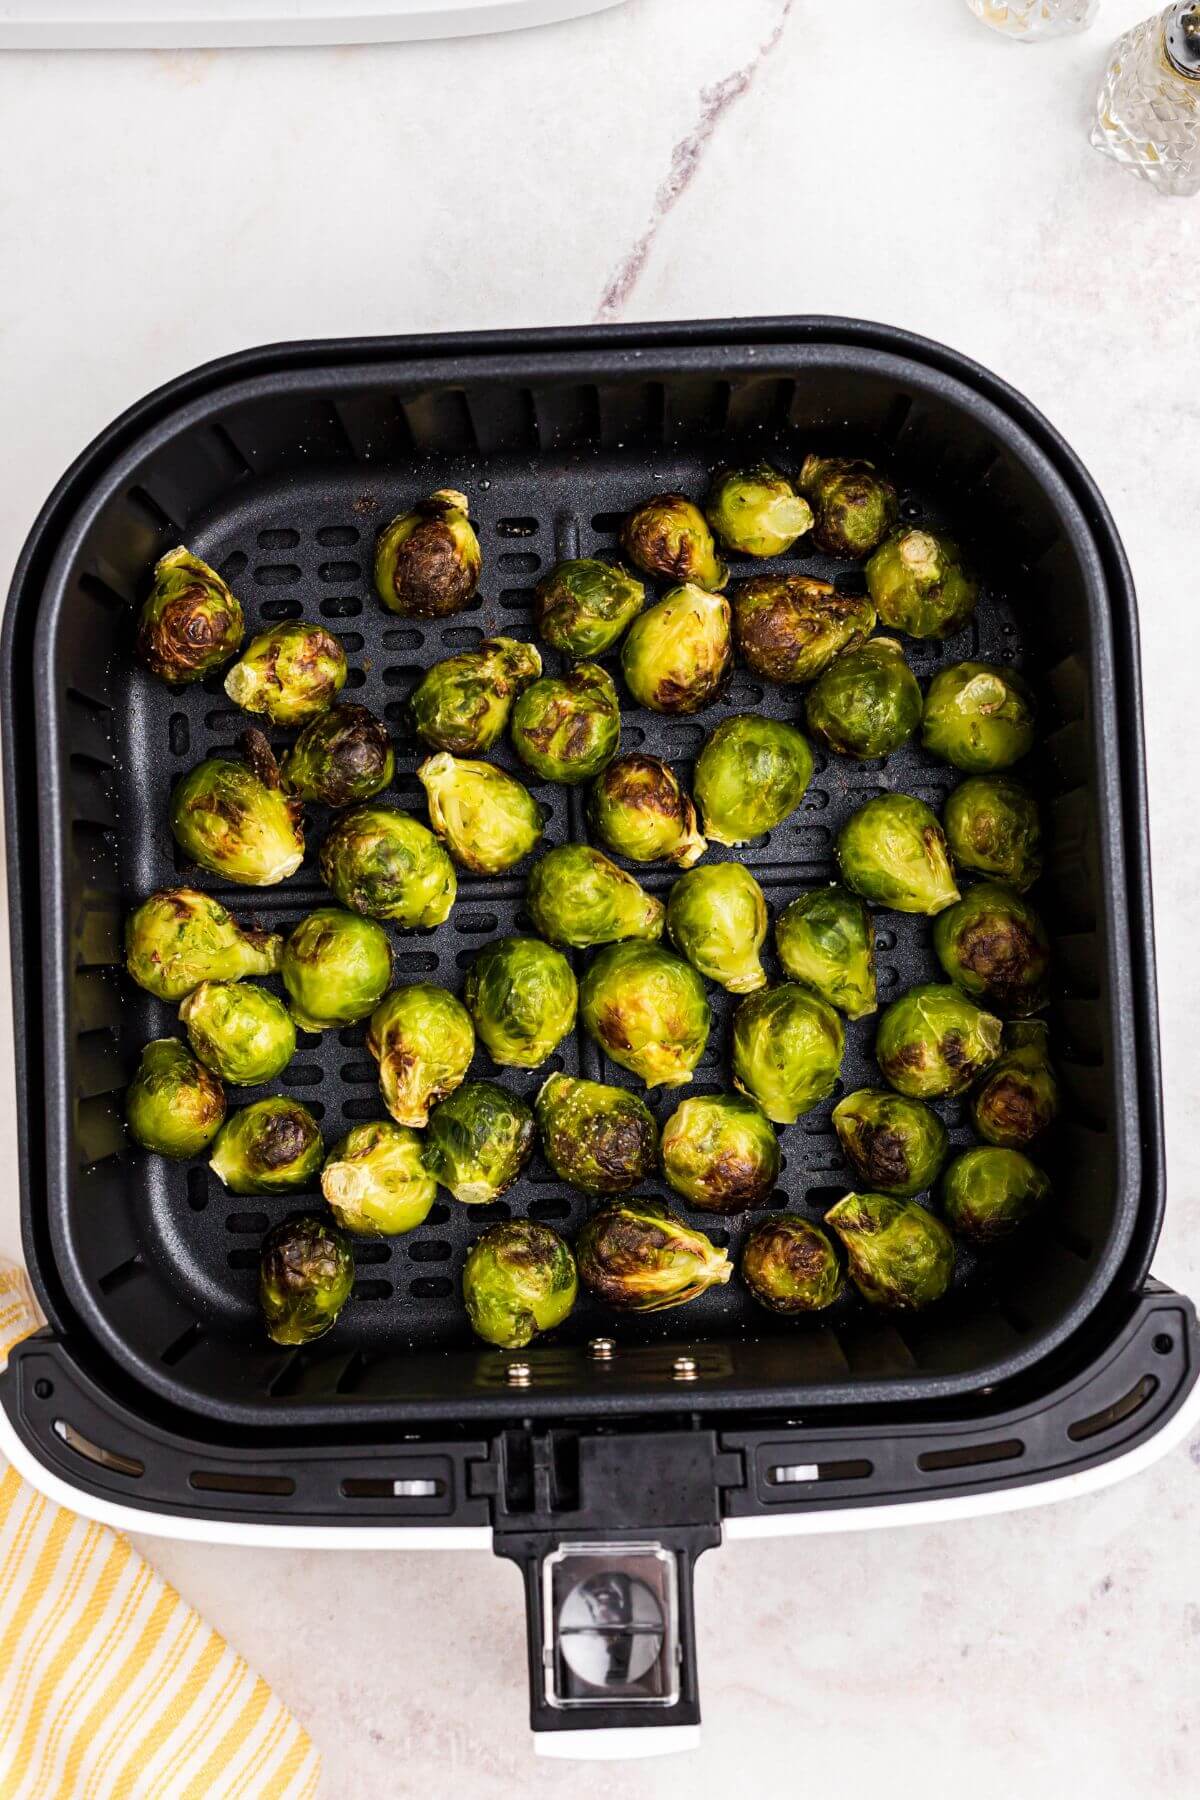 Green juicy brussels sprouts in the air fryer basket after being cooked. 